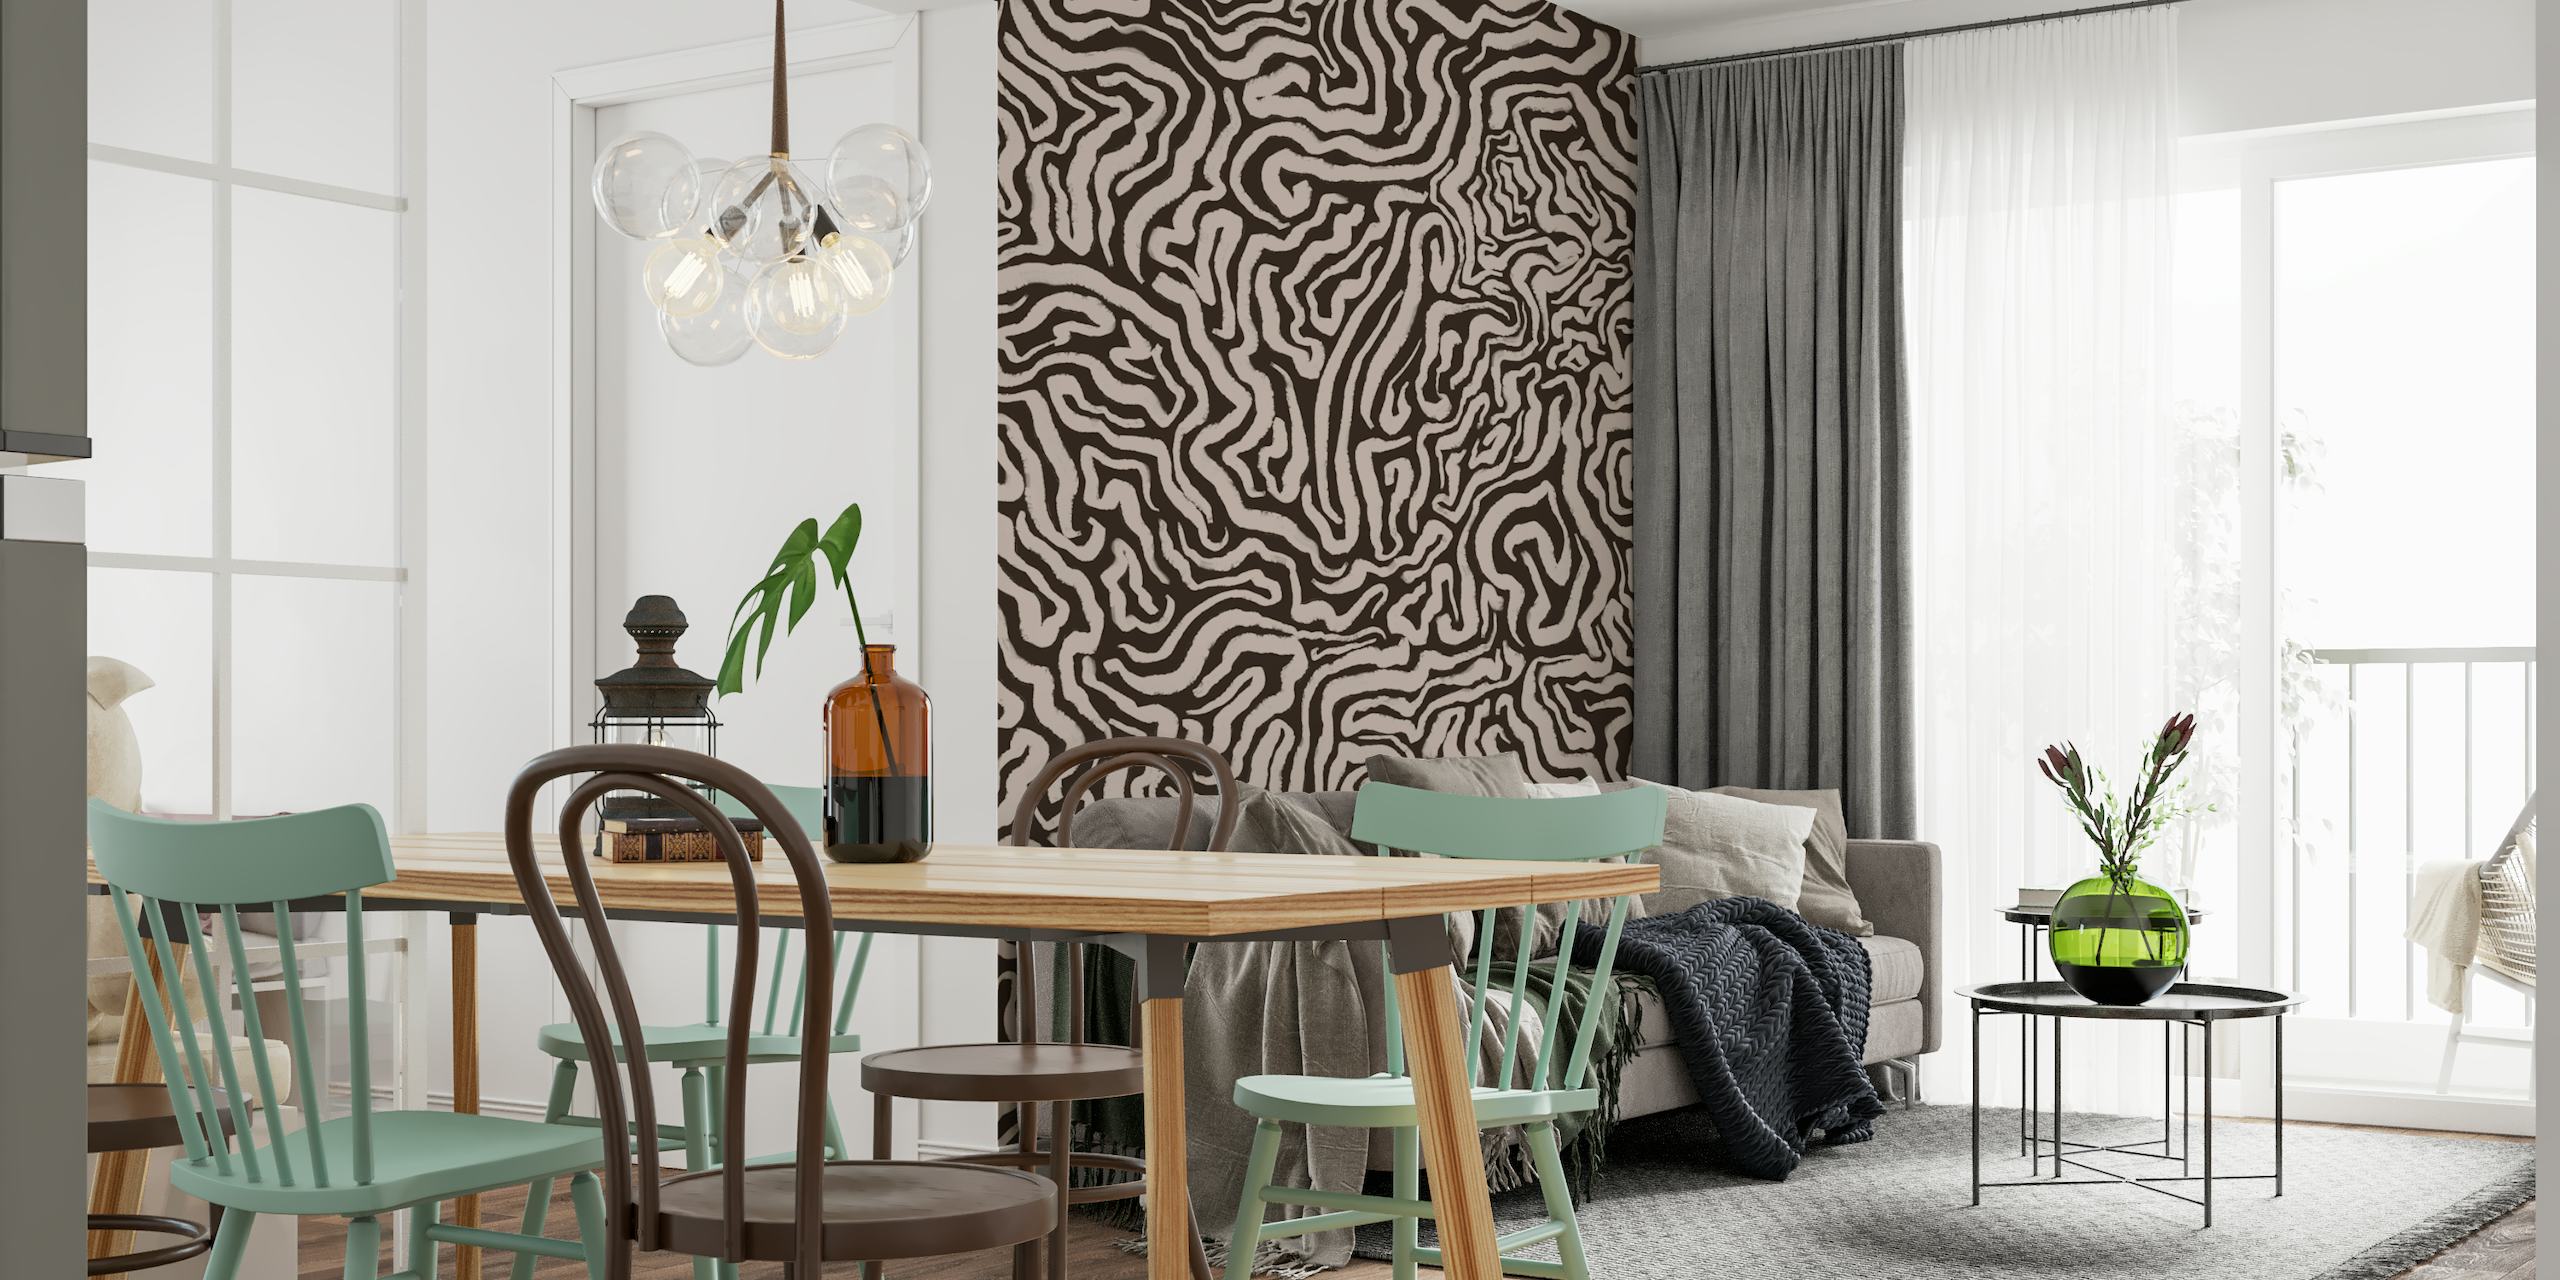 Abstract twisted beige strokes wall mural for modern interior decor